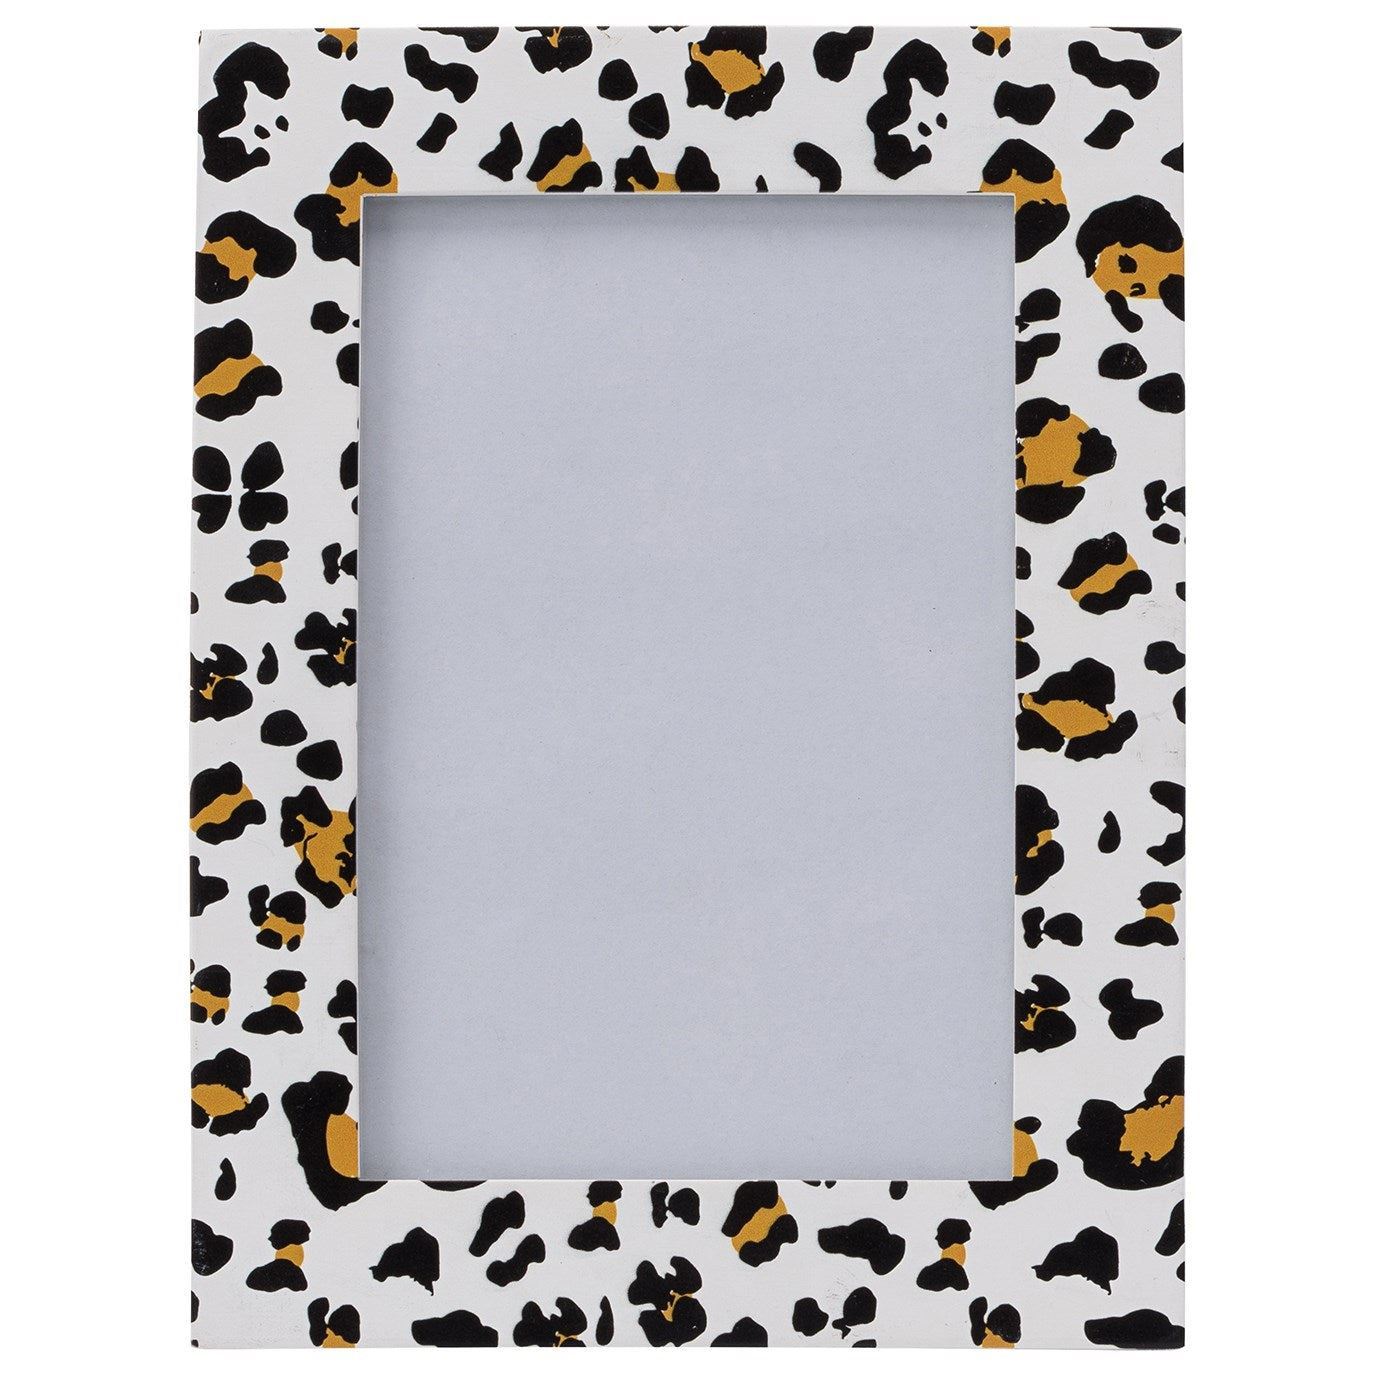 Looking Wild Leopard Frame 4 x 6 inches